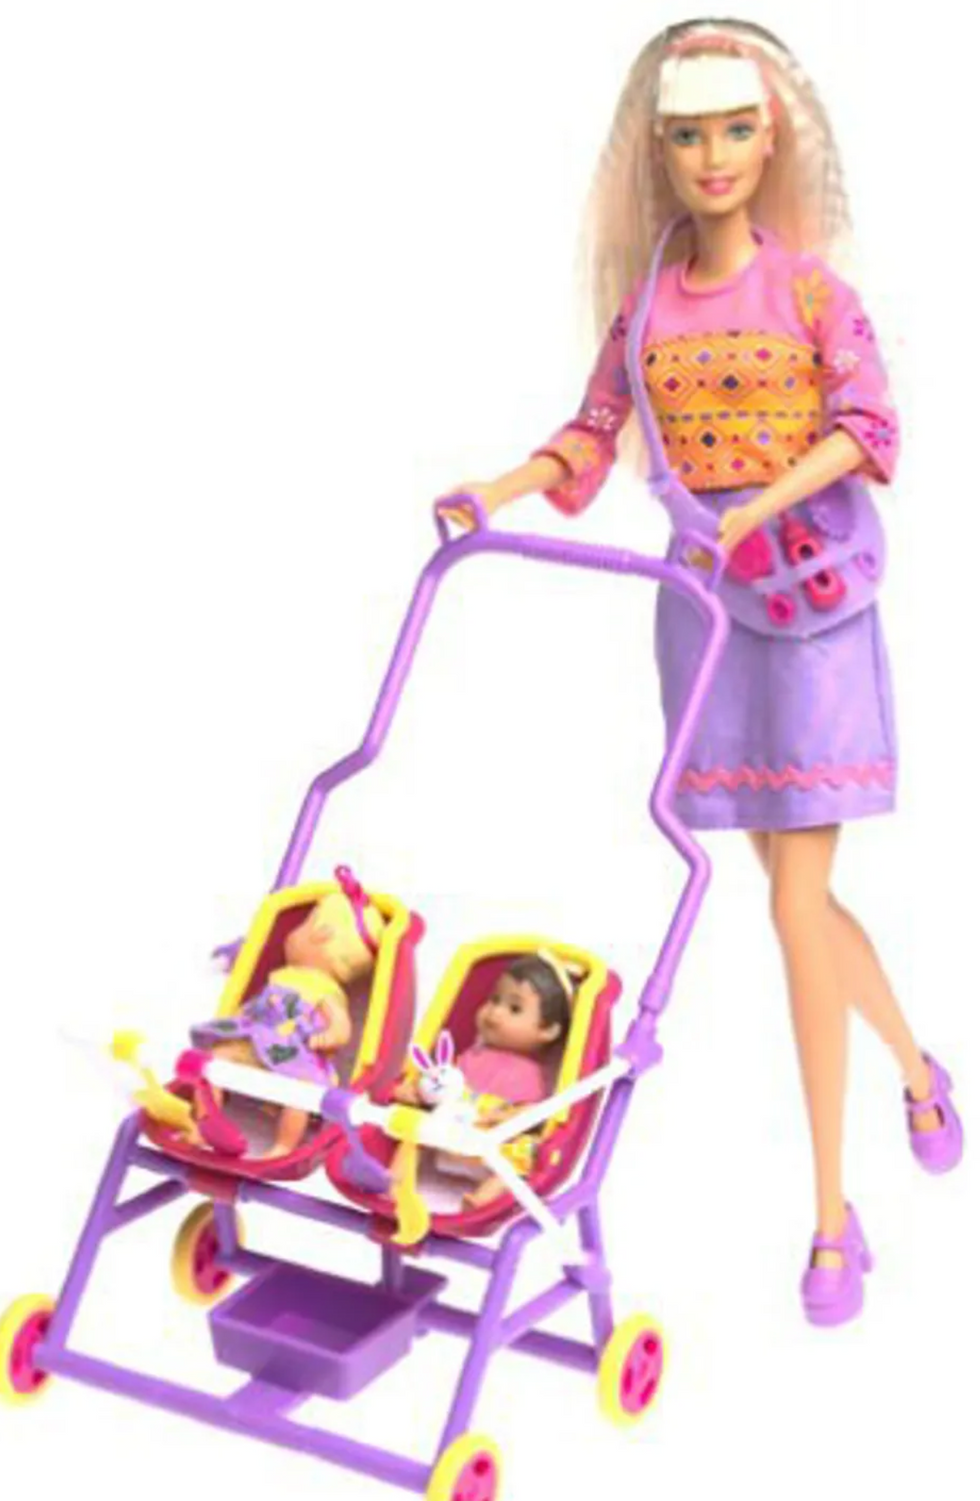 Barbie pushes two babies in stroller